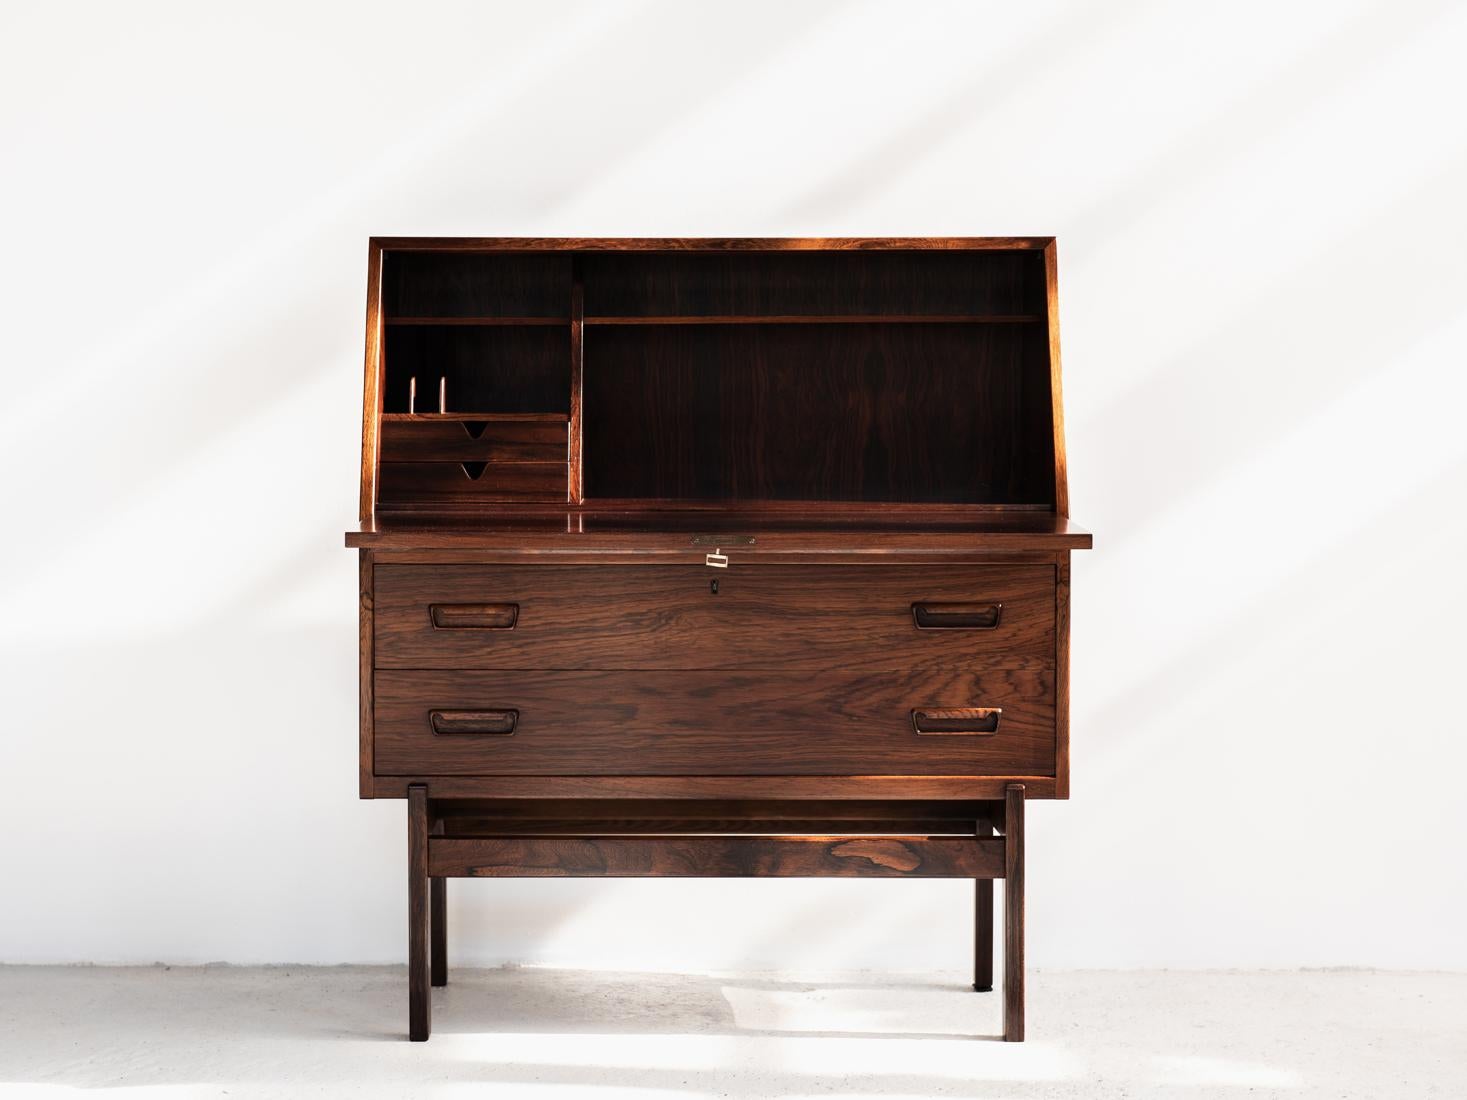 Midcentury secretary desk designed by Arne Wahl Iversen and manufactured by Vinde Møbelfabrik in Denmark in the 1960s. This beautiful secretaire has a practical organiser inside. There is 1 original key available. The secretary desk has a beautiful